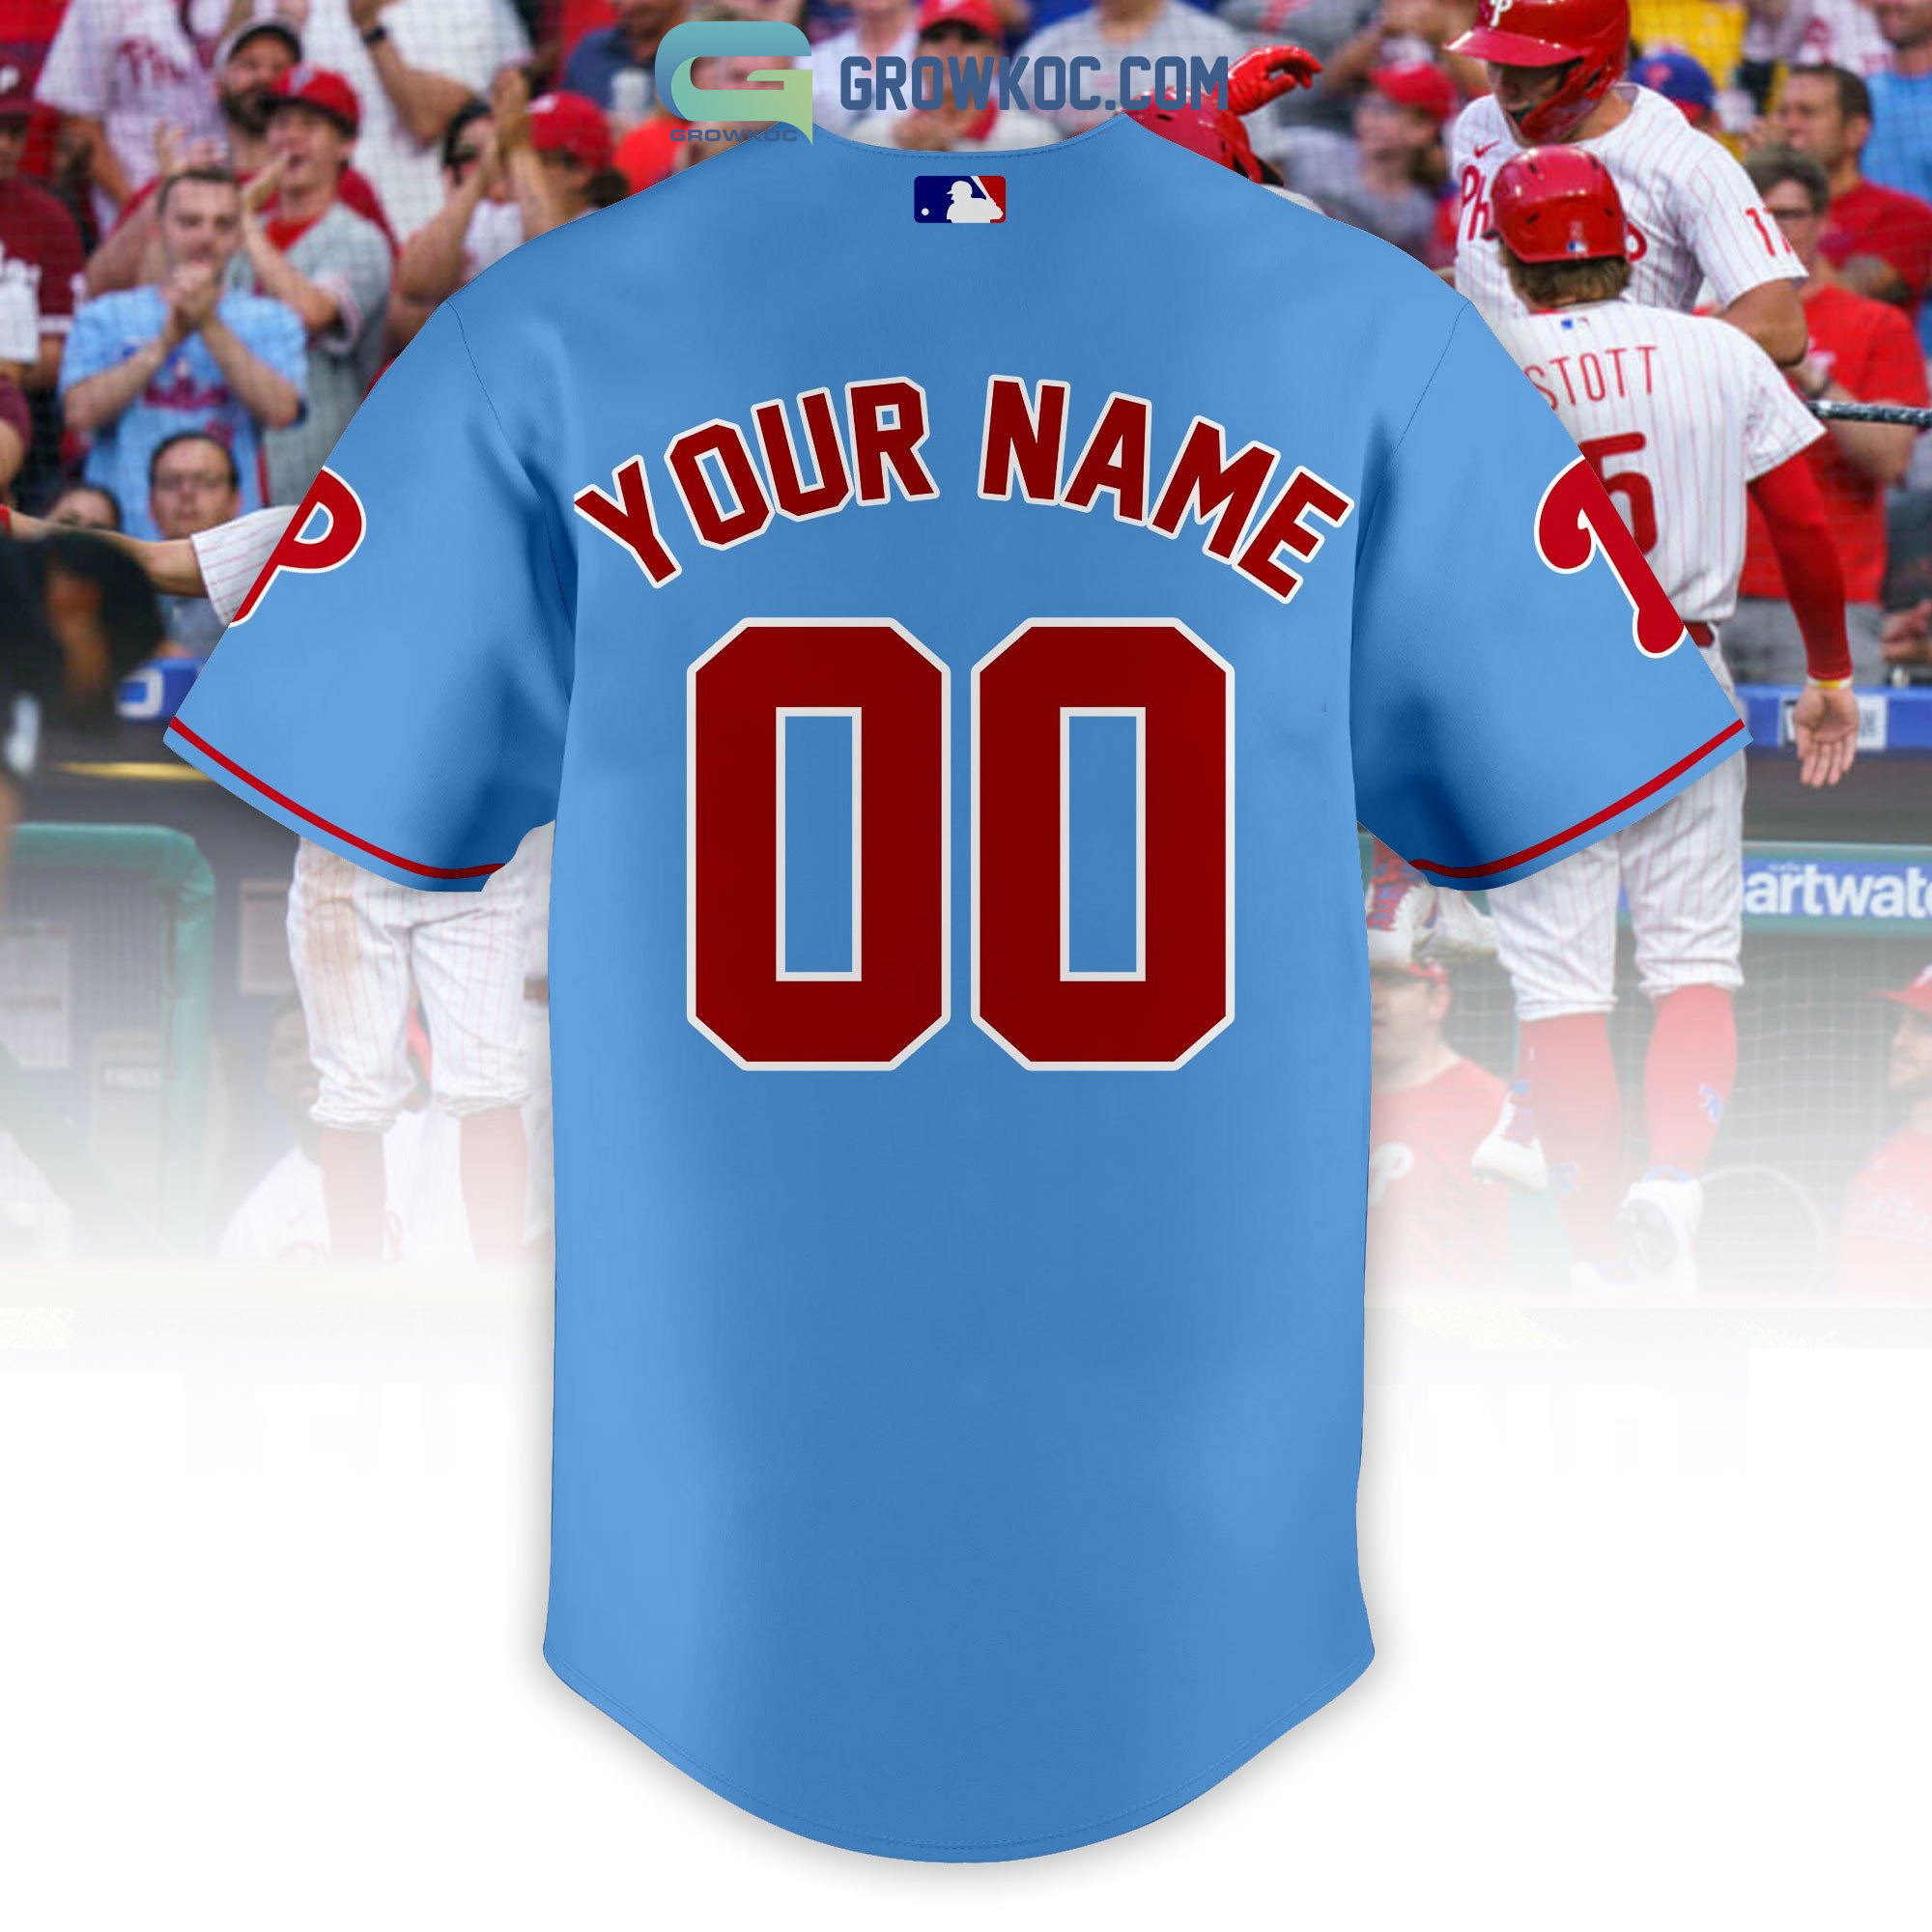 blue and red phillies jersey